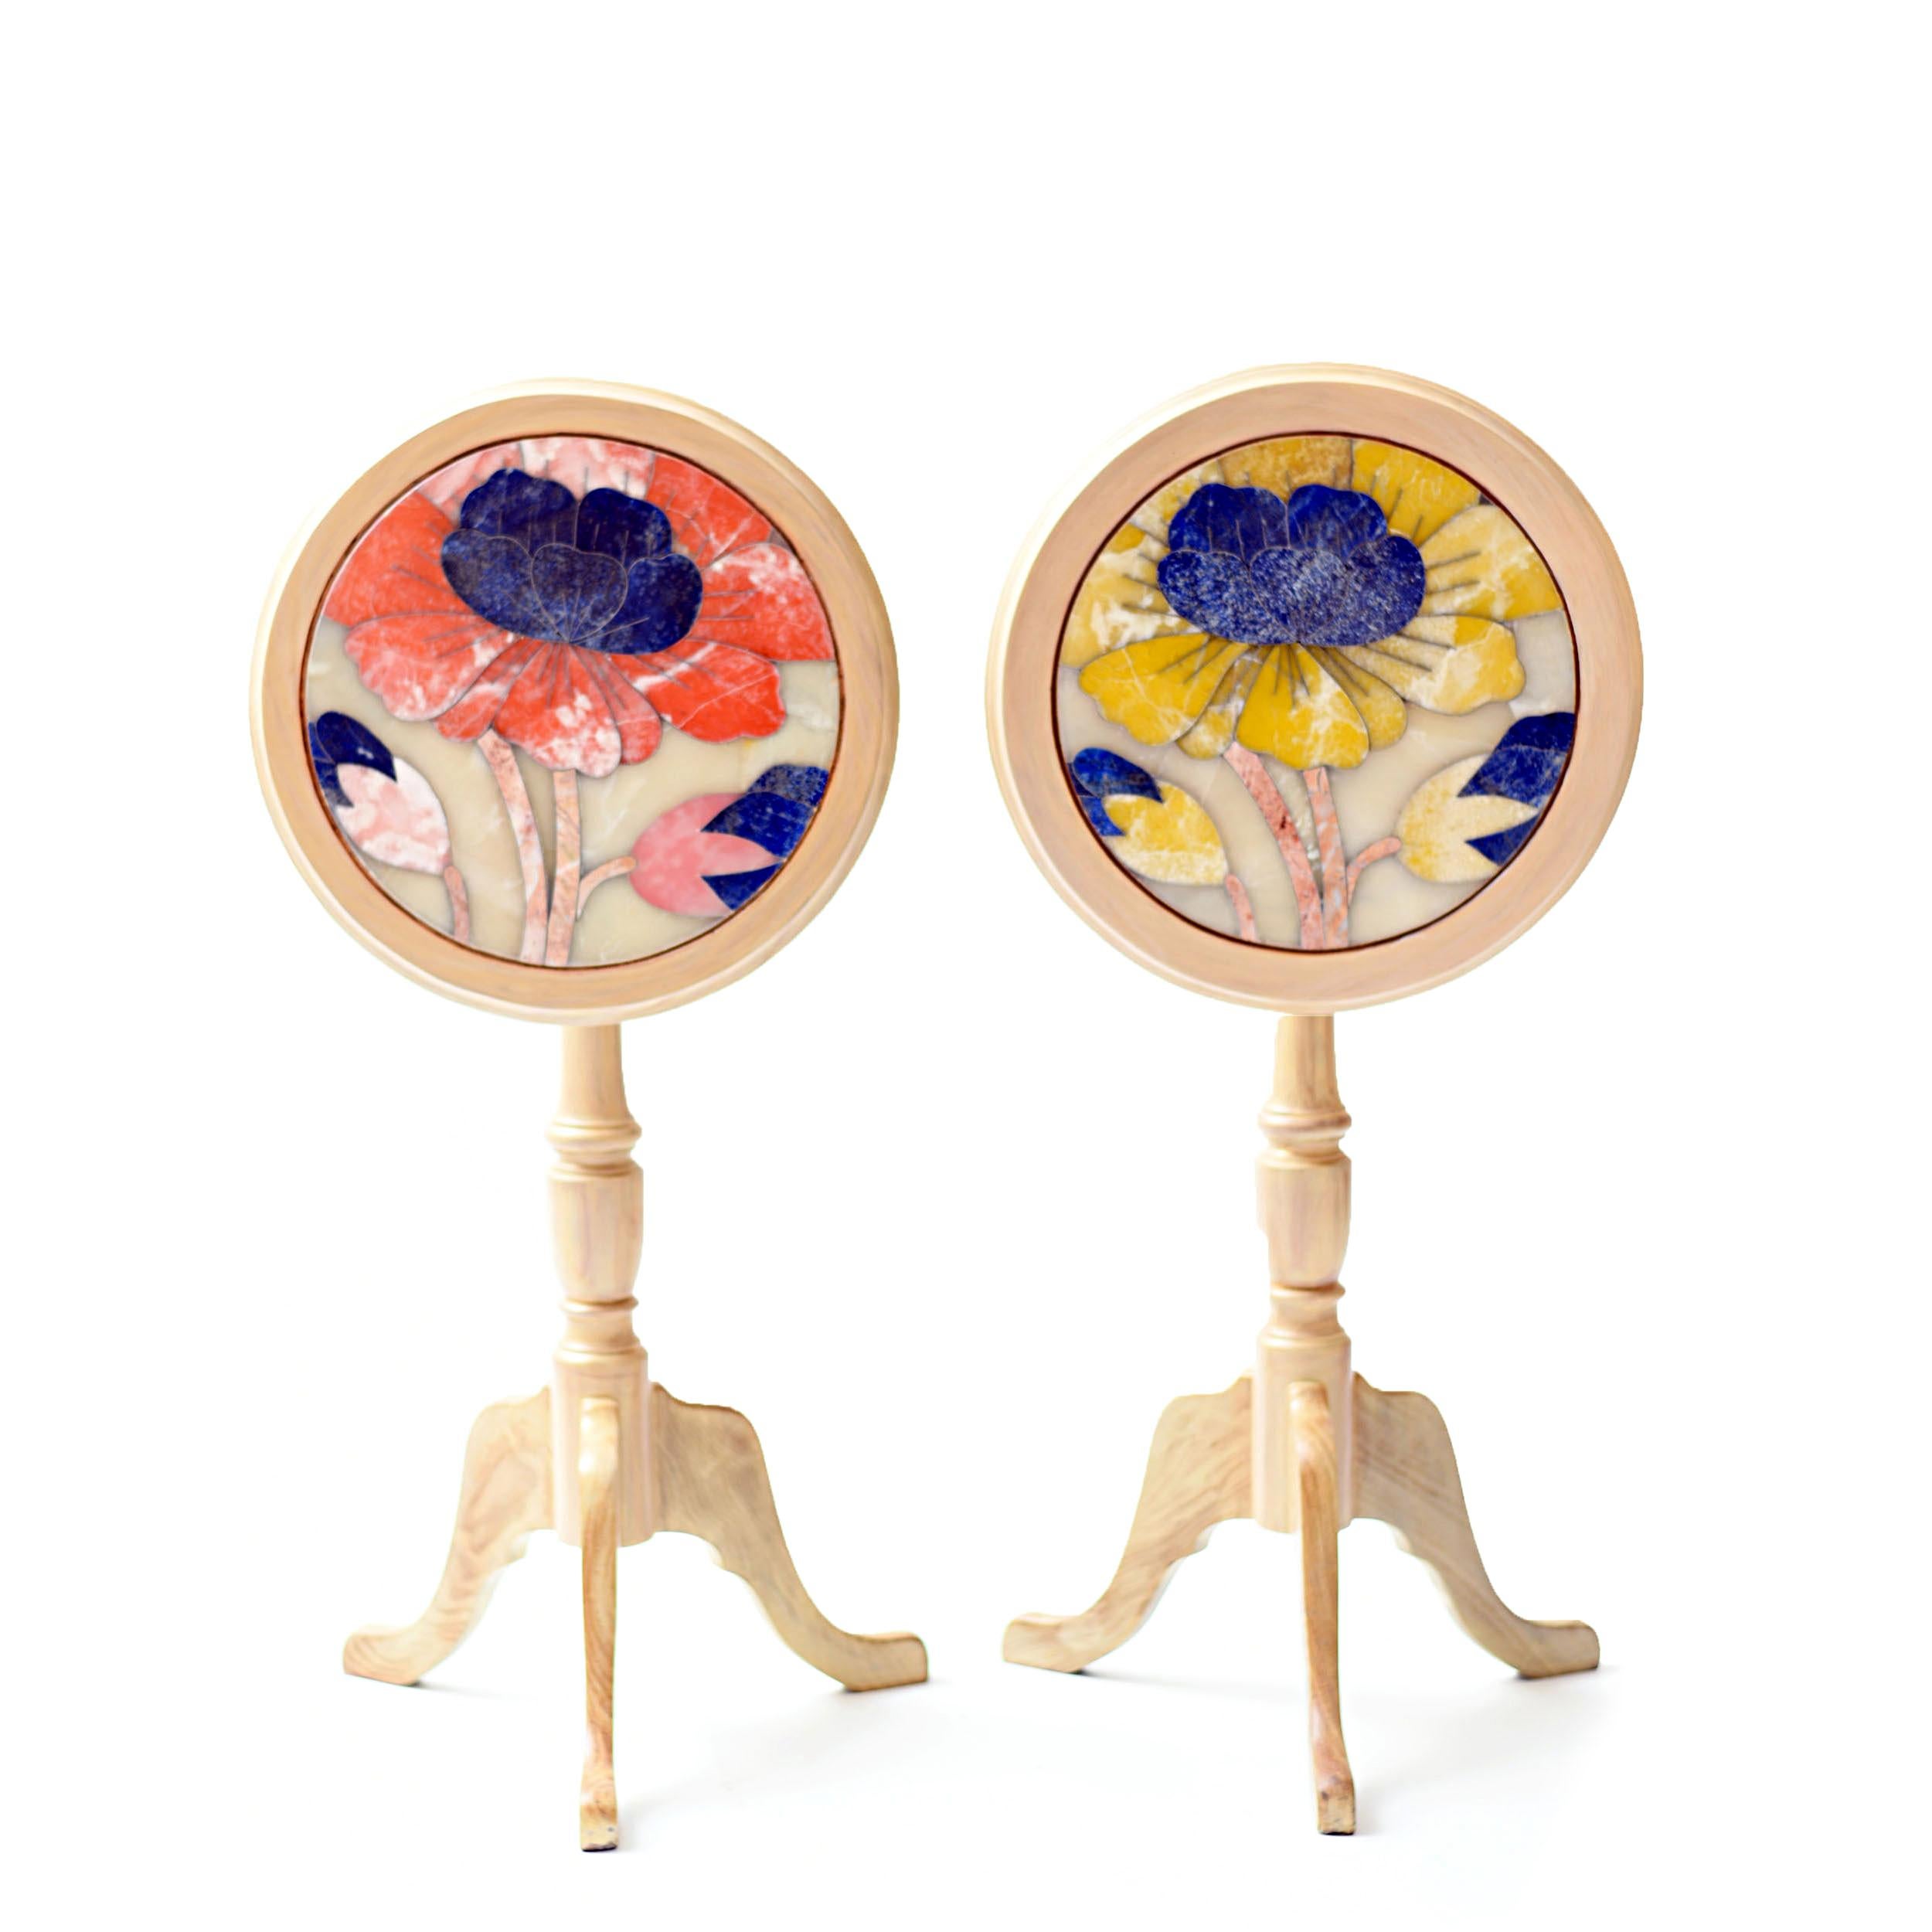 Set of 2 Puvvi tilt-top side tables by Studio Lel
Dimensions: D46 x W46 x H66 cm
Materials:Lapis Lazuli, Onyx, Marble, Wood

From the Urdu word for the chrysanthemum flower, our Vogue-featuring Puvvi collection is a lively celebration of